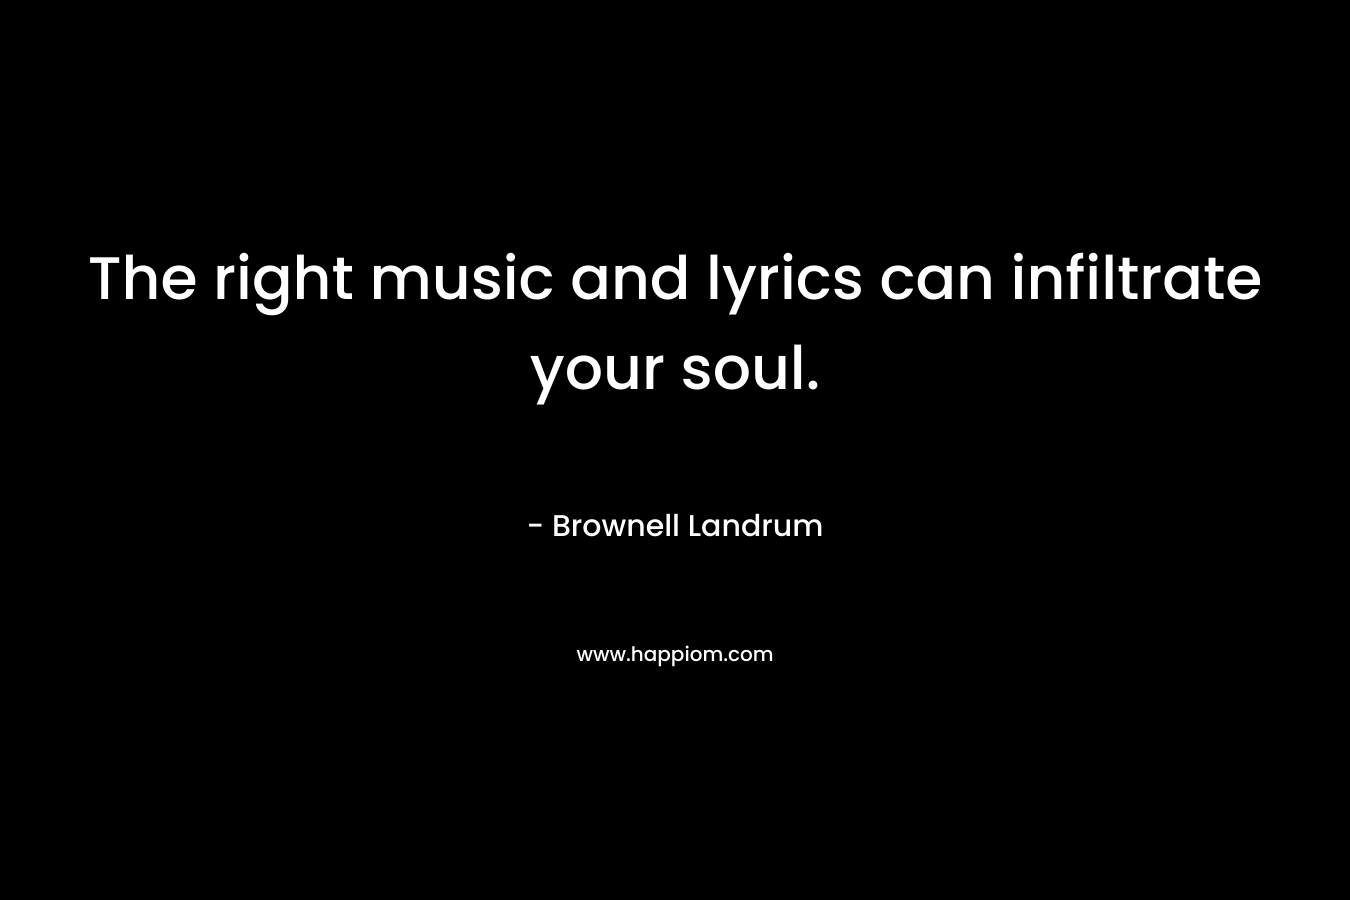 The right music and lyrics can infiltrate your soul. – Brownell Landrum